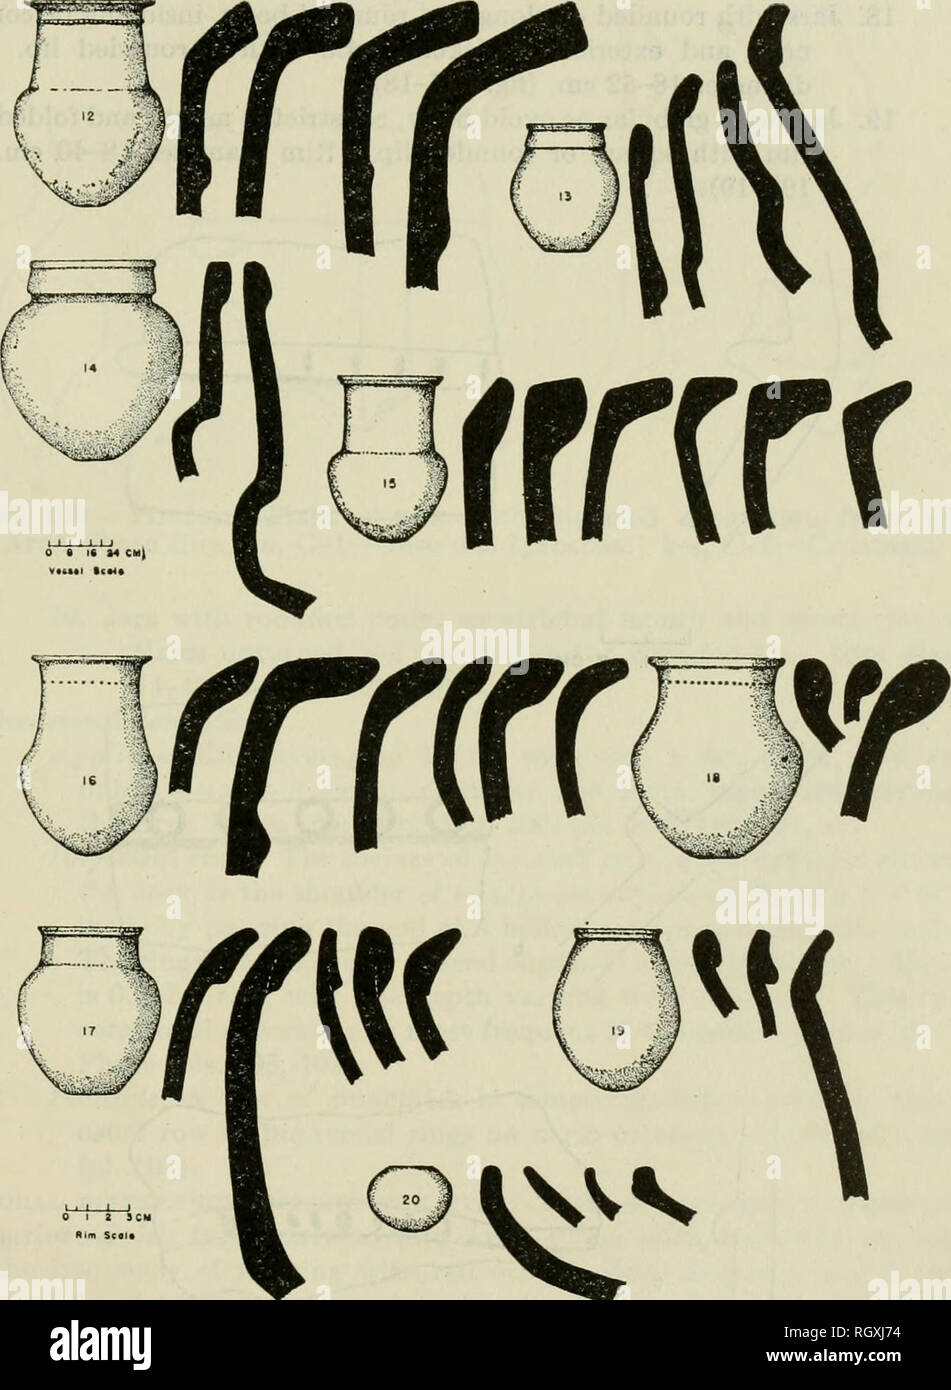 Bulletin. Ethnology. MB6GRBS AND BTANS] ARCHEOLOGY AT MOUTH OP AMAZON 529  12. Large burial jars with rounded body, tall vertical neck and everted rim  expanding in thickness toward a square or